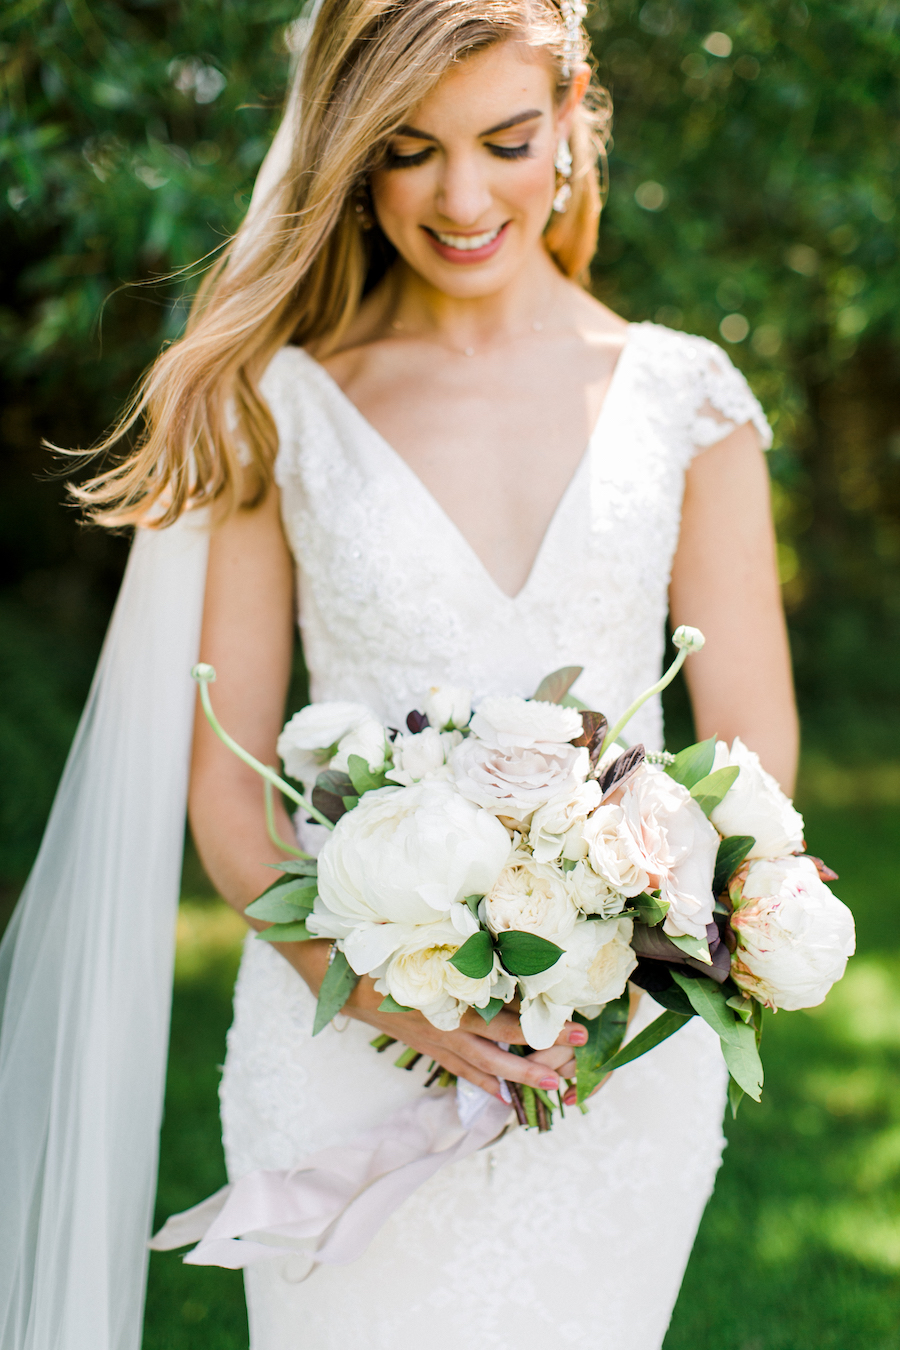 A bride smiling at her bouquet